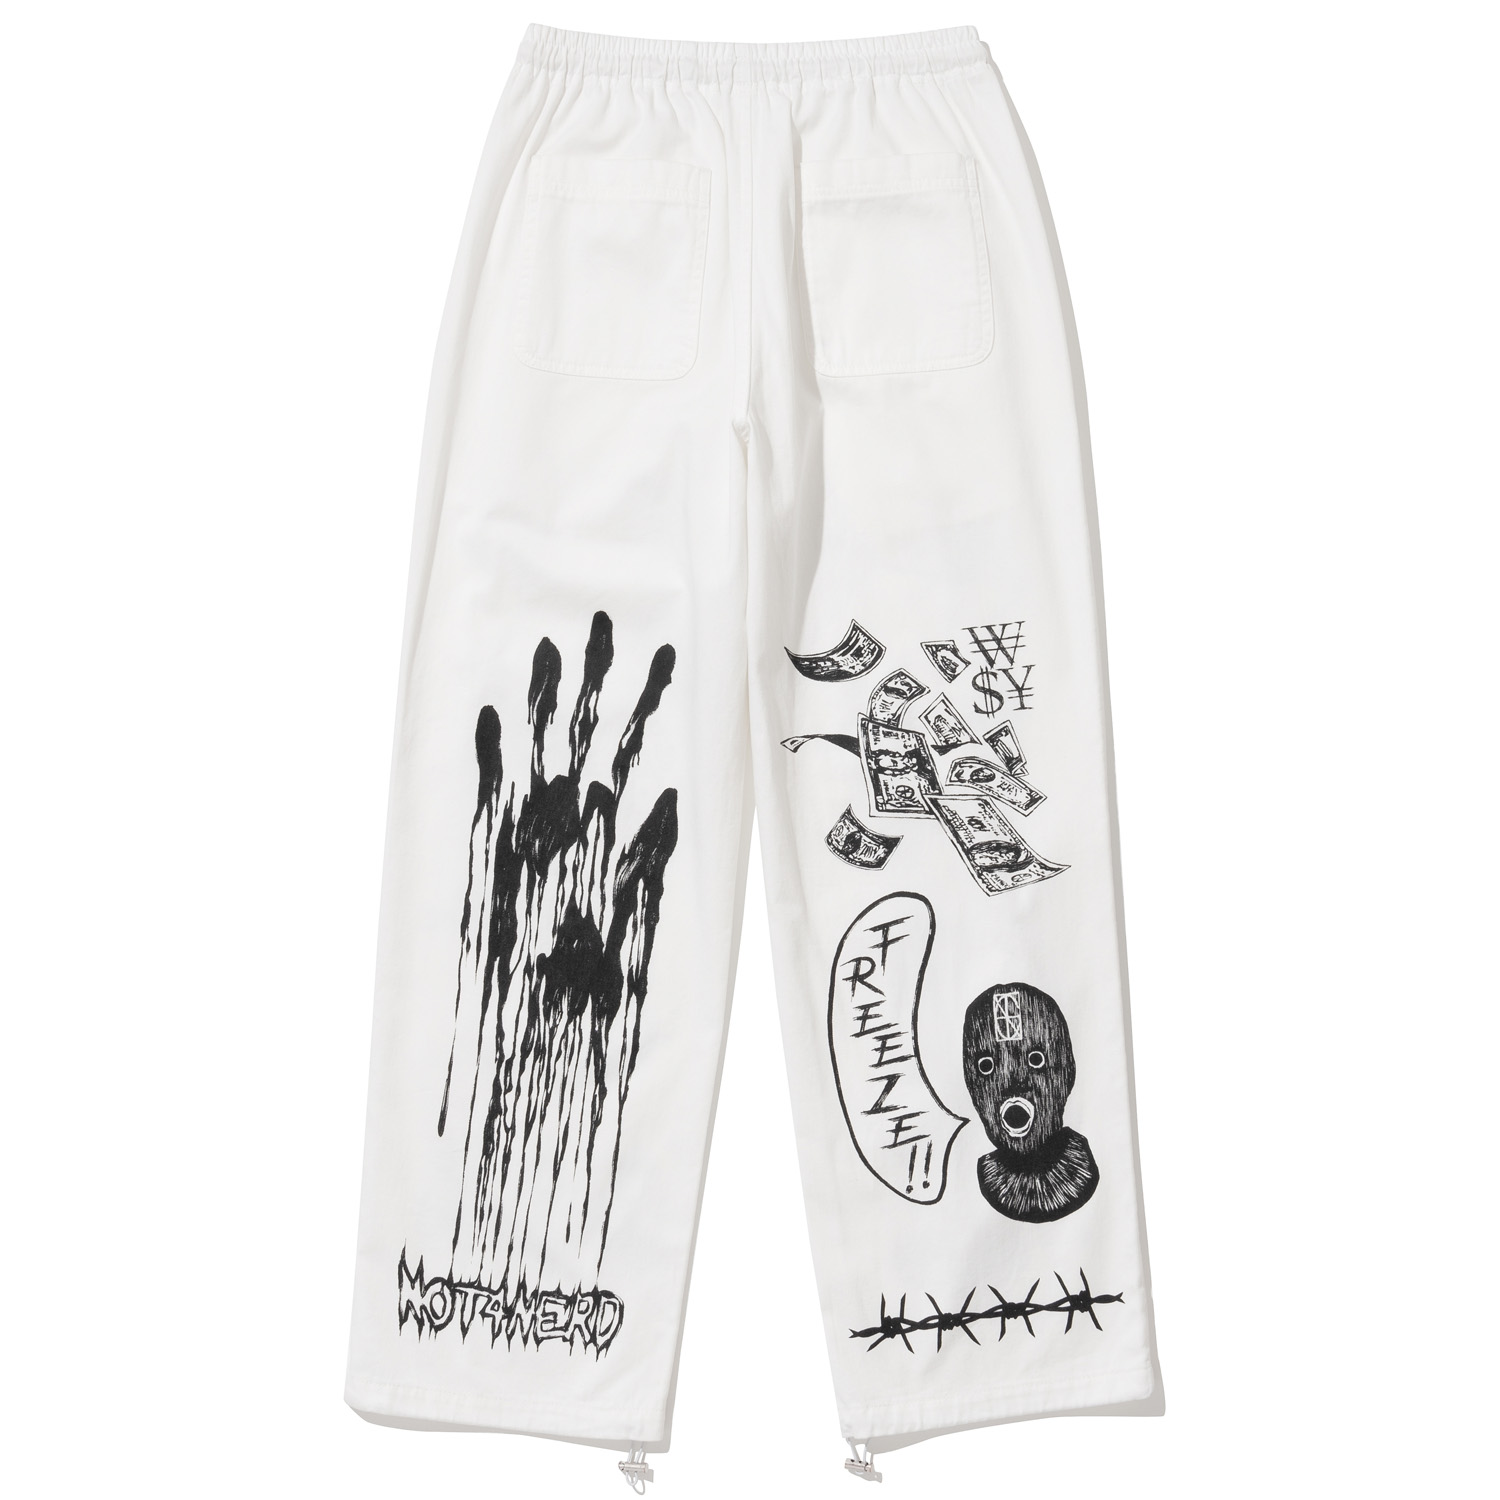 22 Graphic Printed Cotton Pants - Ivory,NOT4NERD